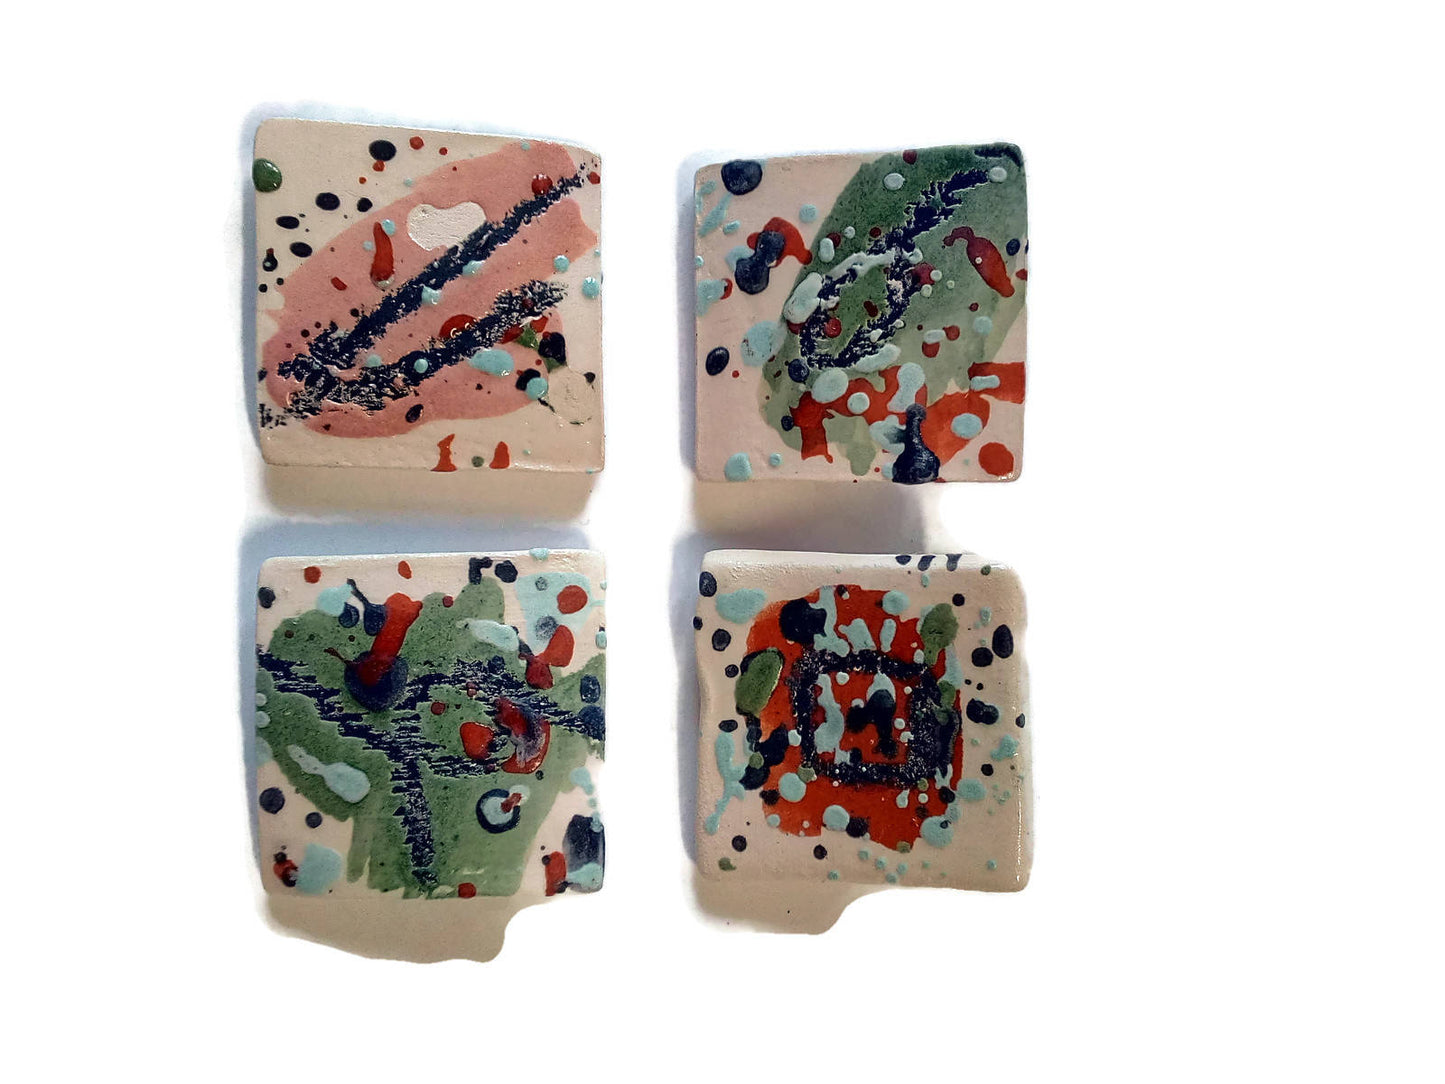 Small Abstract Ceramic Brooch For Women, Scarf Brooch, Mothers Day Gift Idea - Ceramica Ana Rafael